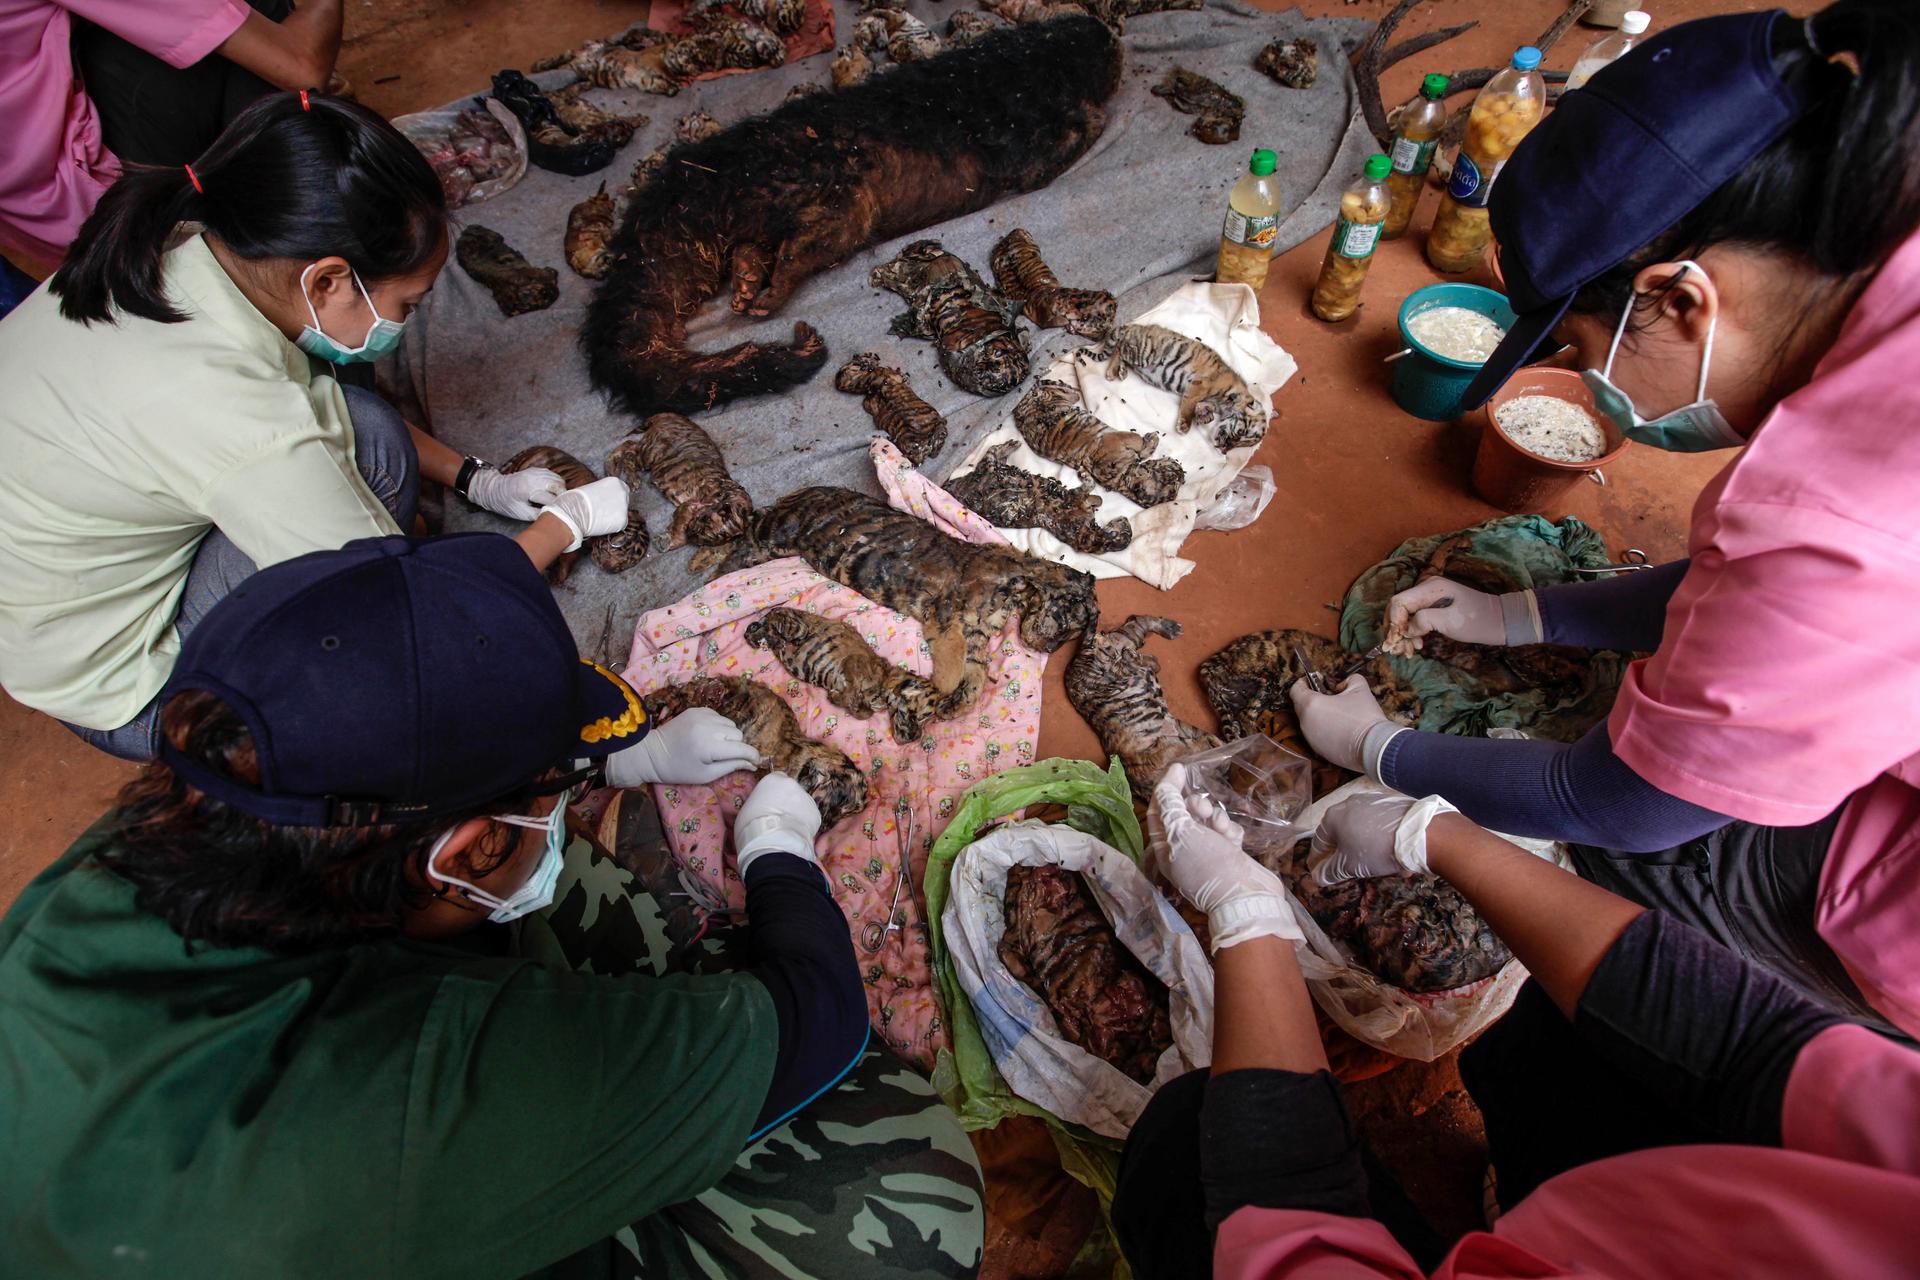 Thai government wildlife officers collect samples for DNA testing from the carcasses of 40 tiger cubs and a Binturong (also known as a bearcat) found undeclared at the Wat Pha Luang Ta Bua Tiger Temple on June 1, 2016 in Kanchanaburi province, Thailand. W